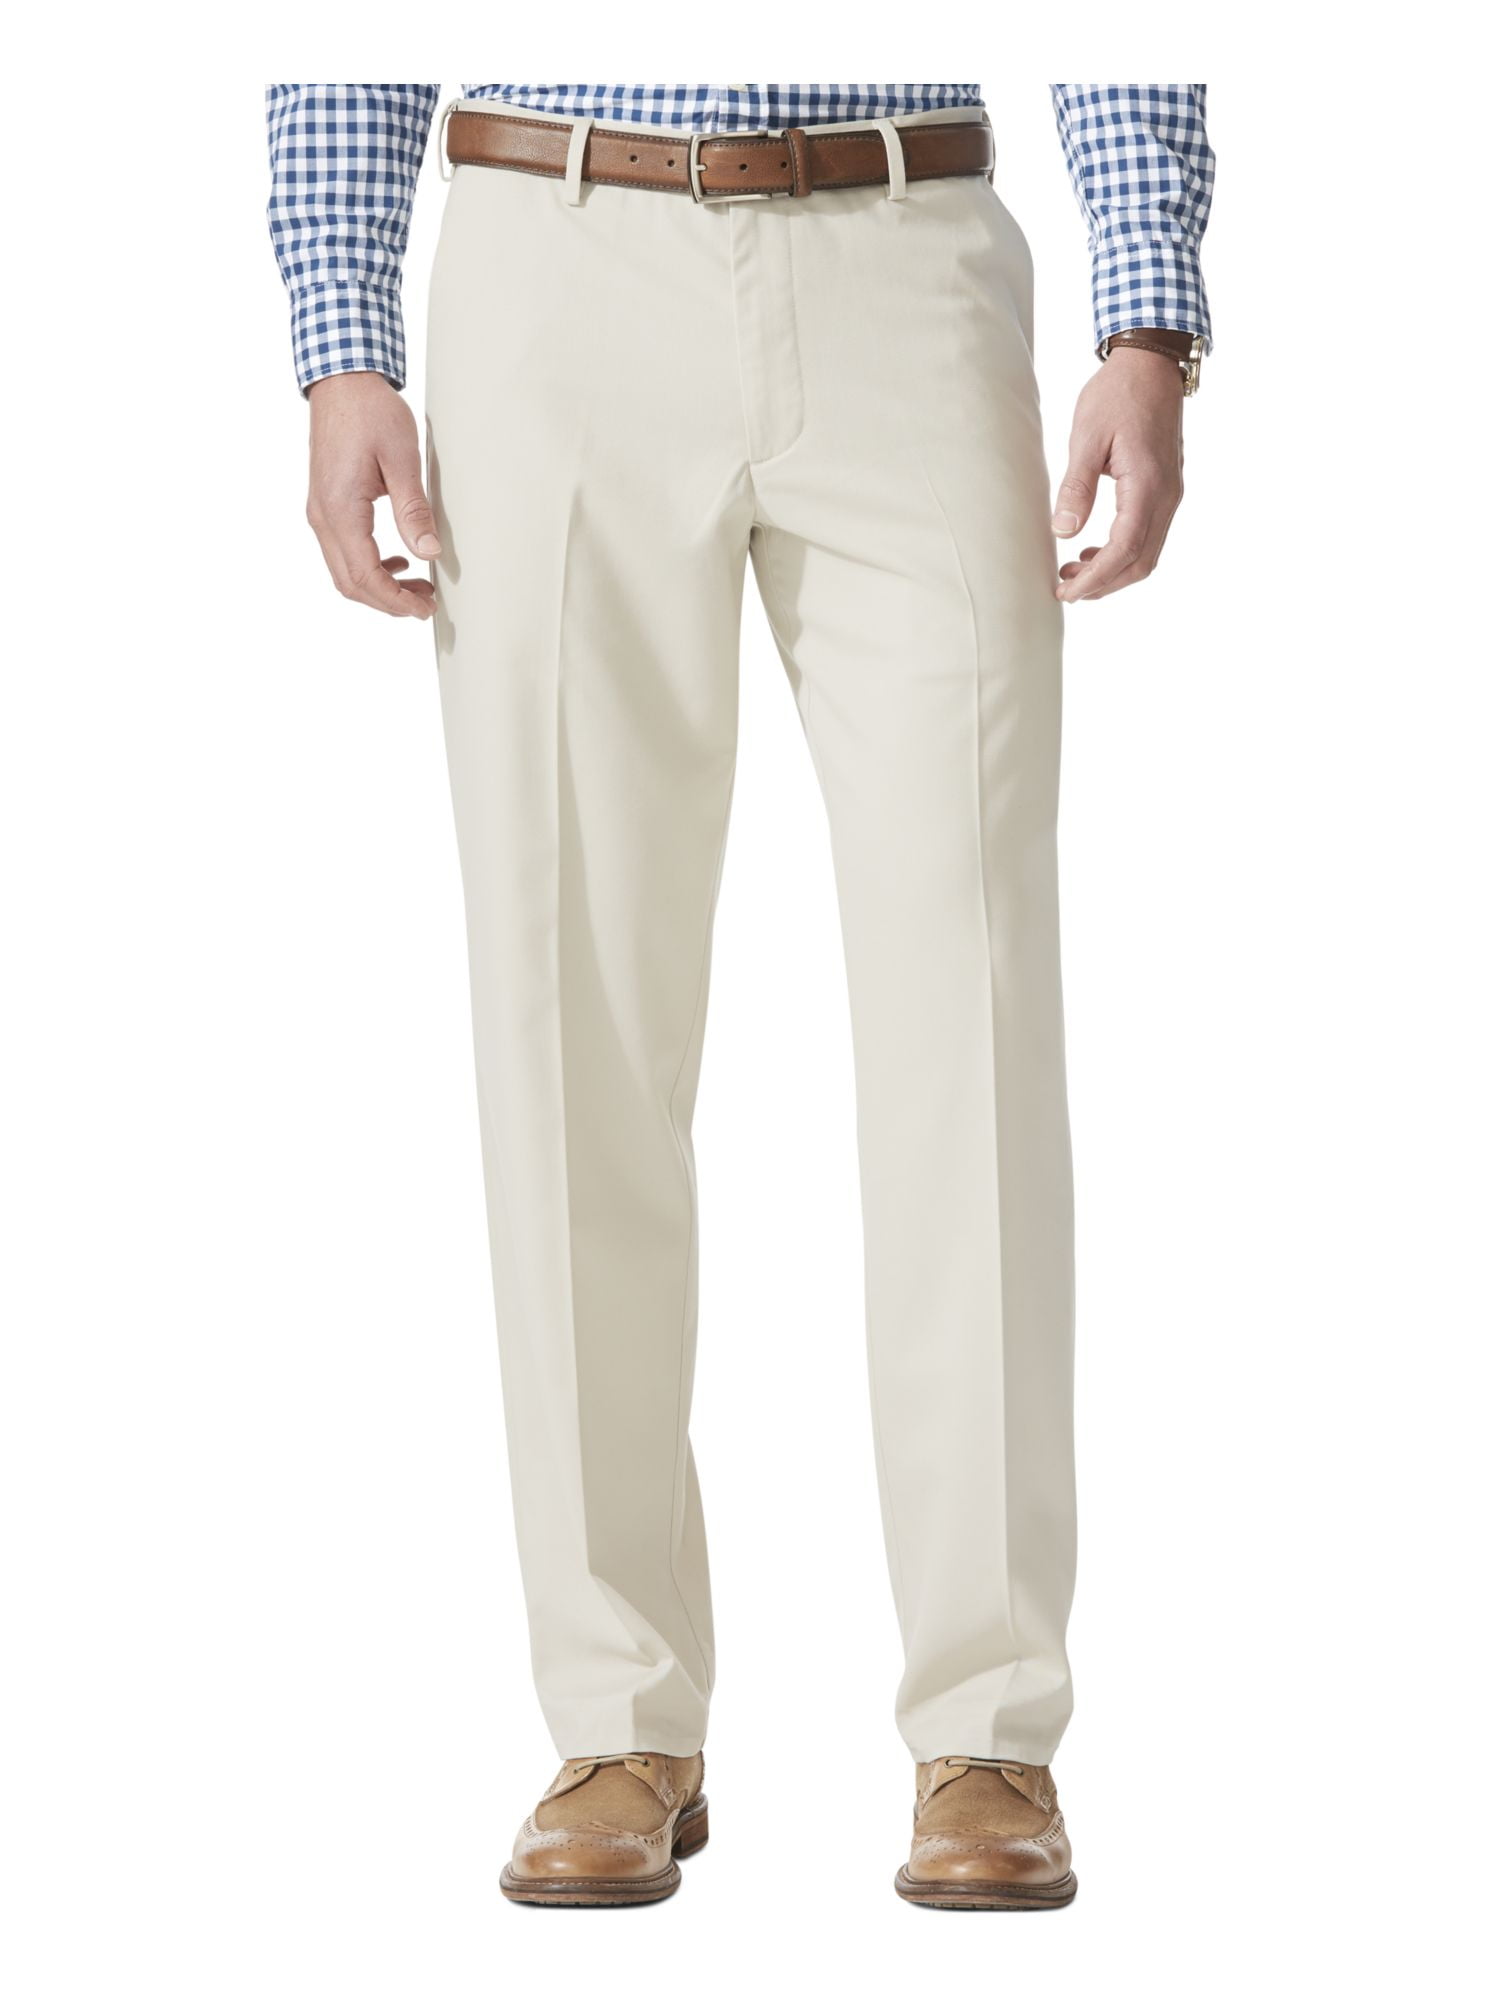 DOCKERS Mens Beige Relaxed Fit Wrinkle Free Chino Pants W36/ L32 ...